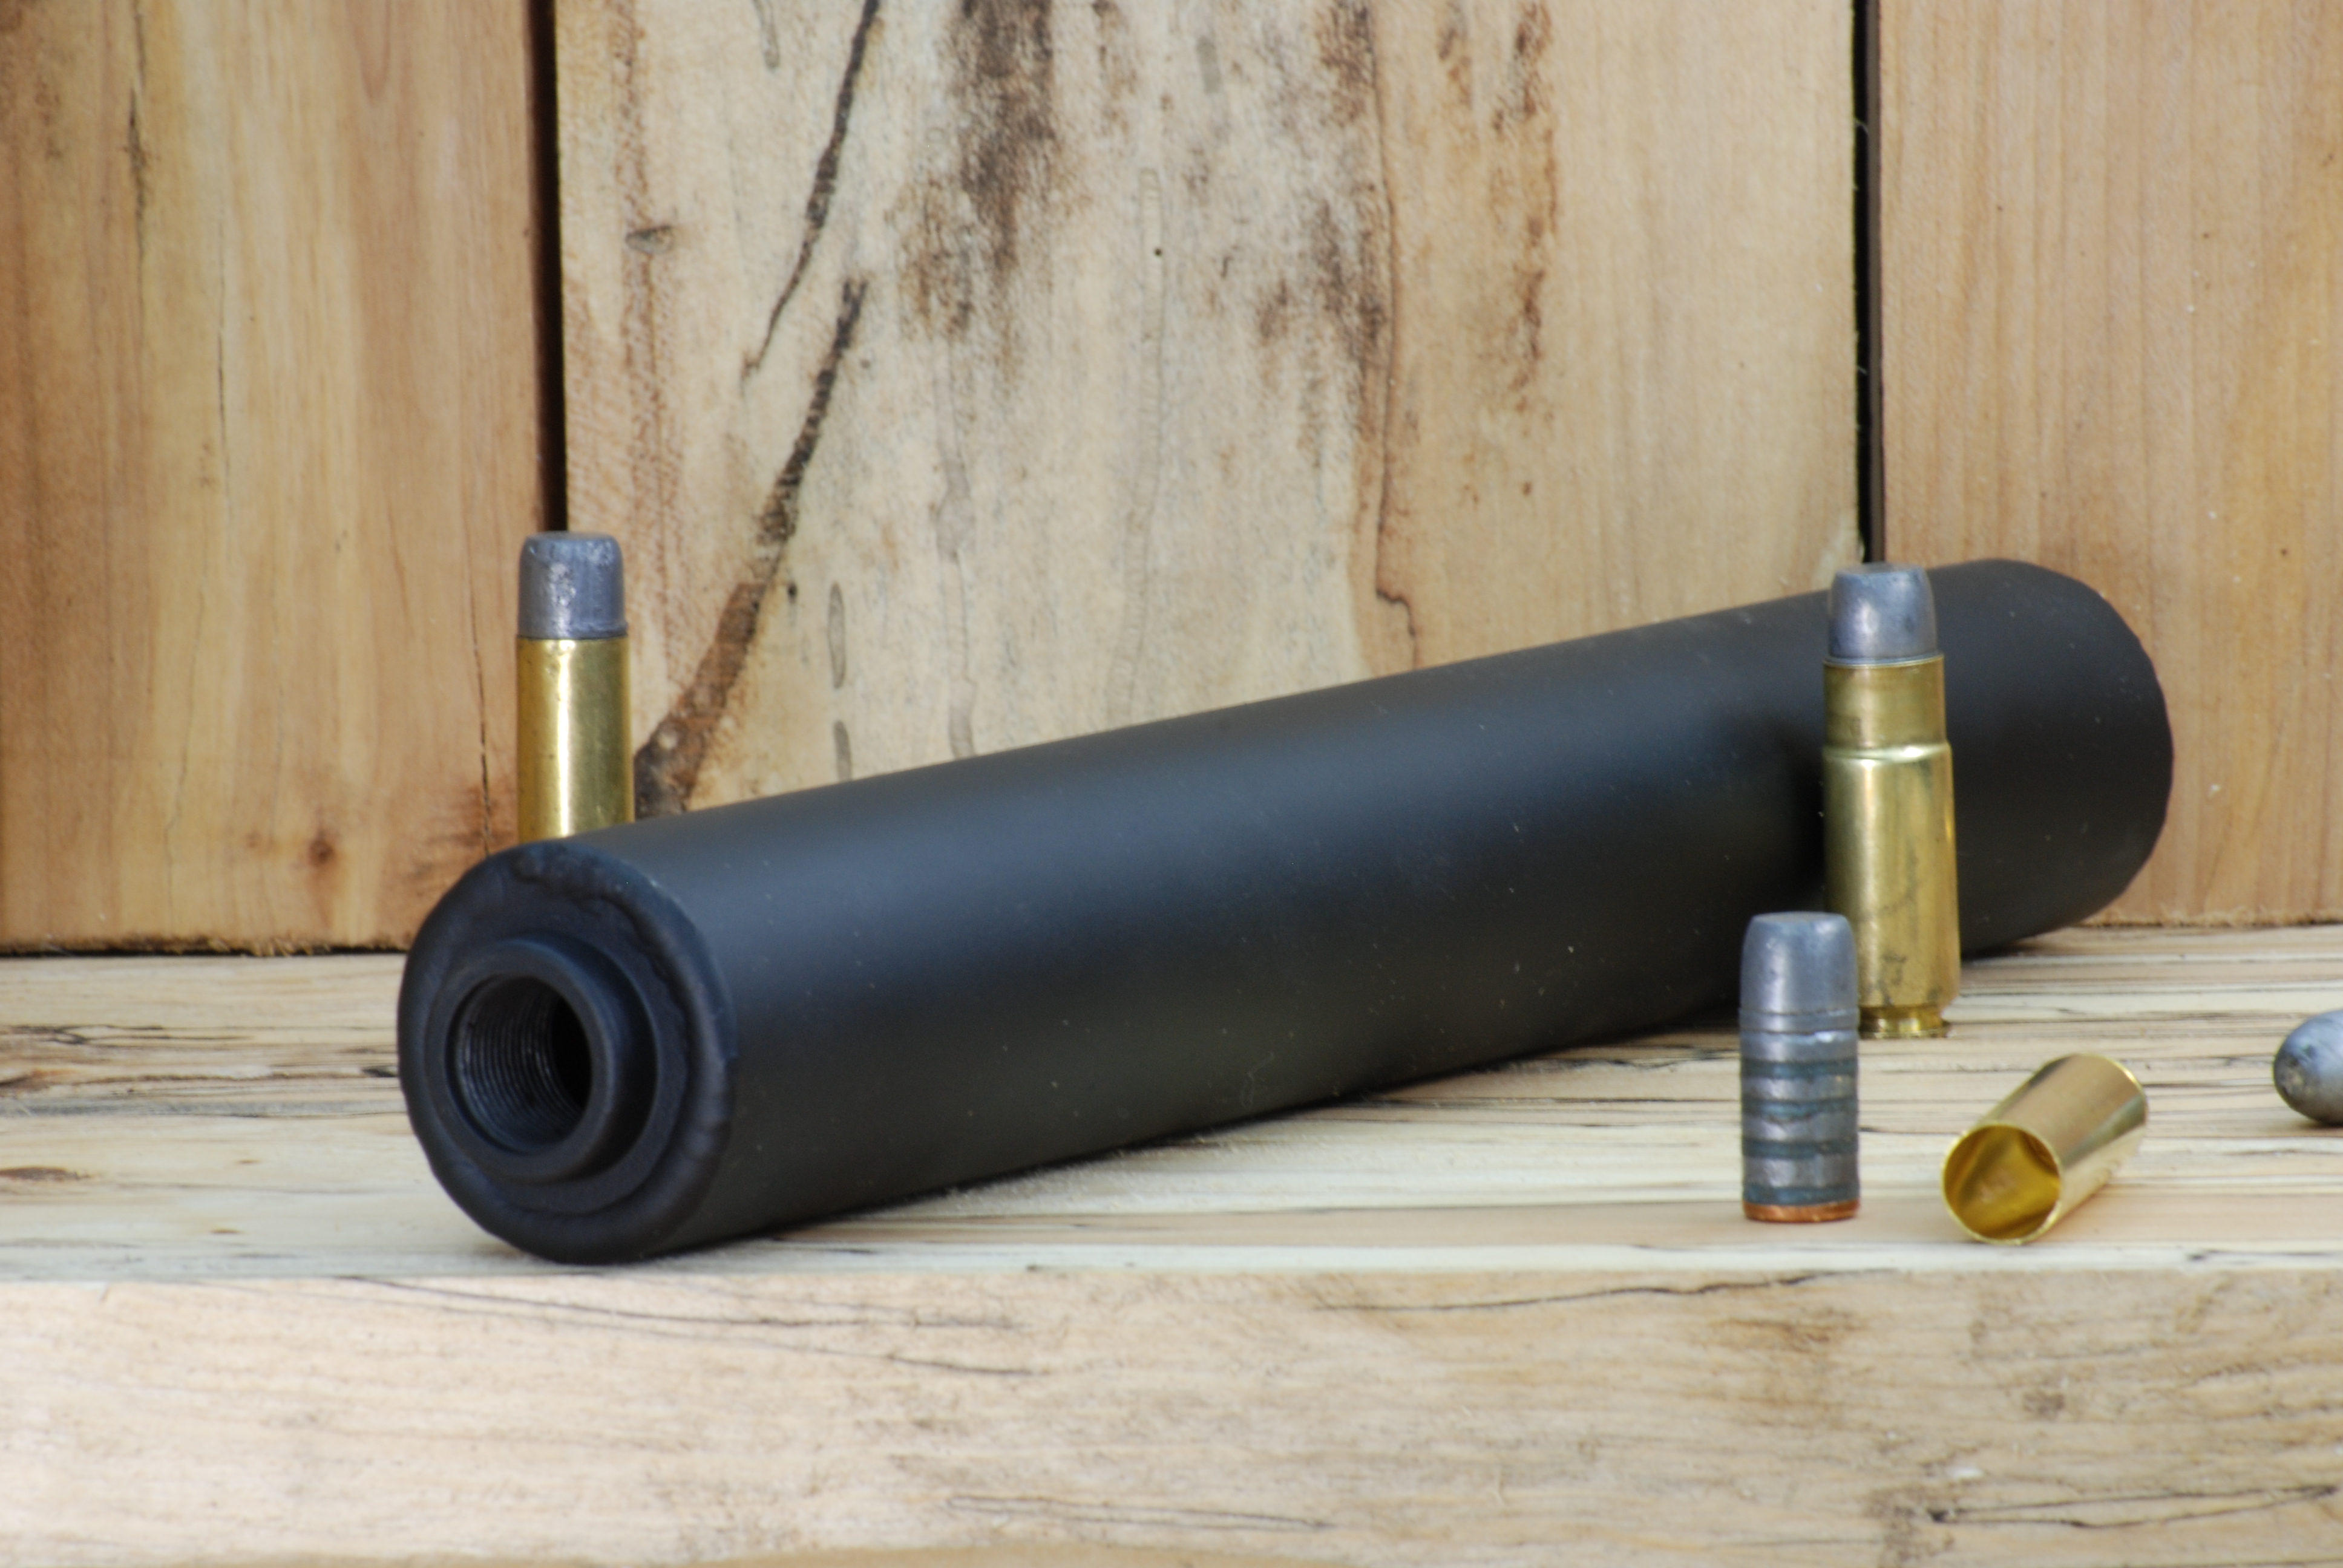 MTR 164 Suppressors and The Meaning of Life